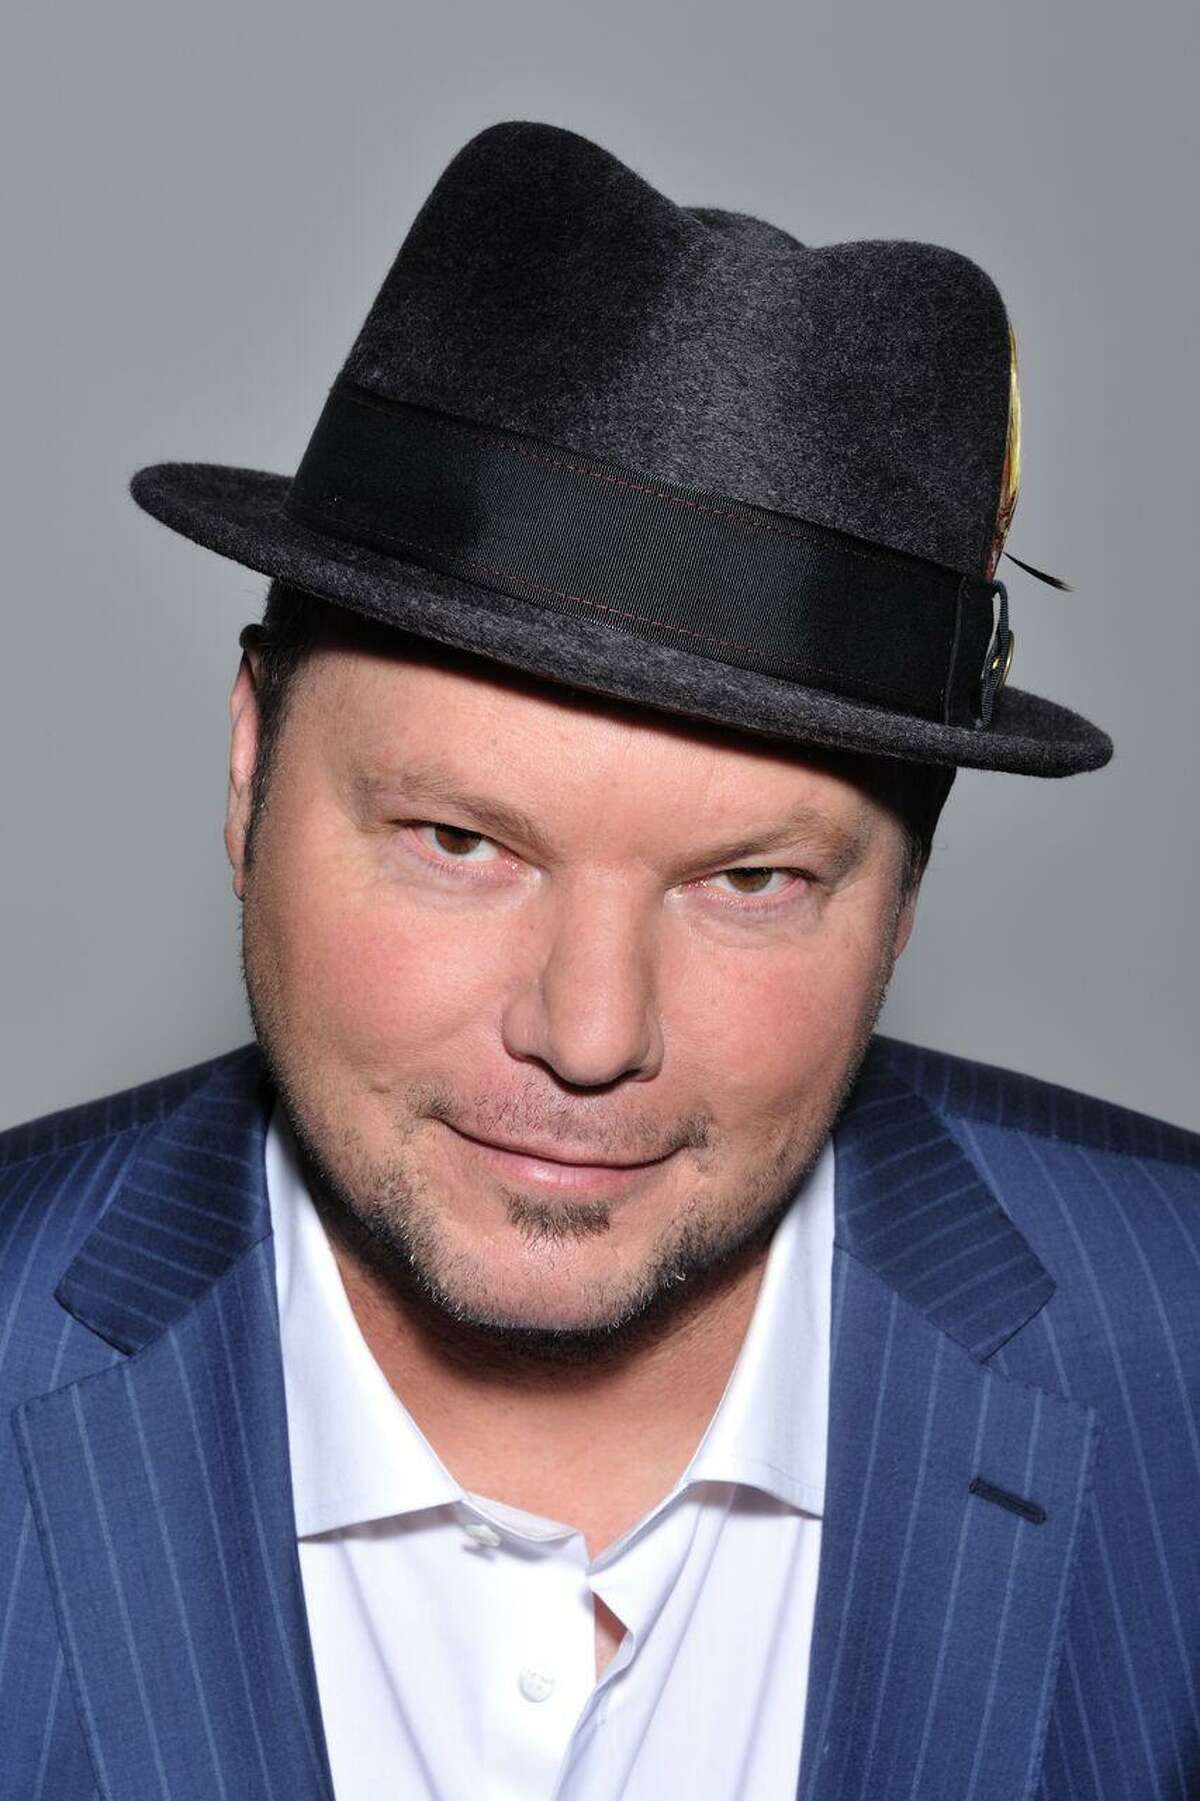 Singer and songwriter Christopher Cross, a San Antonio native, performed with the San Antonio Symphony on Saturday night at the Tobin Center for the Performing Arts.